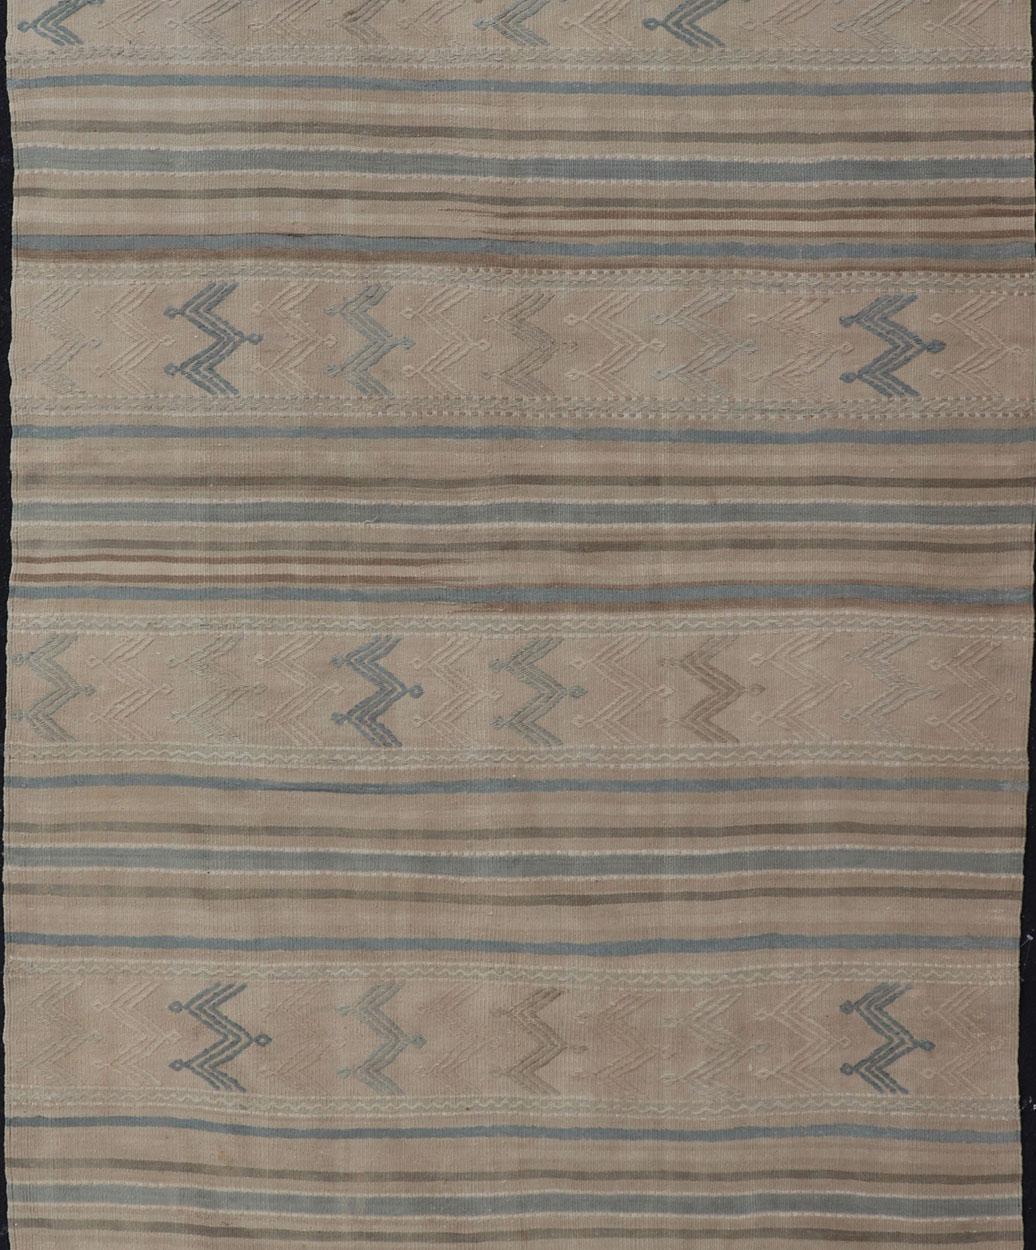 Turkish Vintage Kilim With Embroidered Motifs in Light Tan, Blue L. Brown In Good Condition For Sale In Atlanta, GA